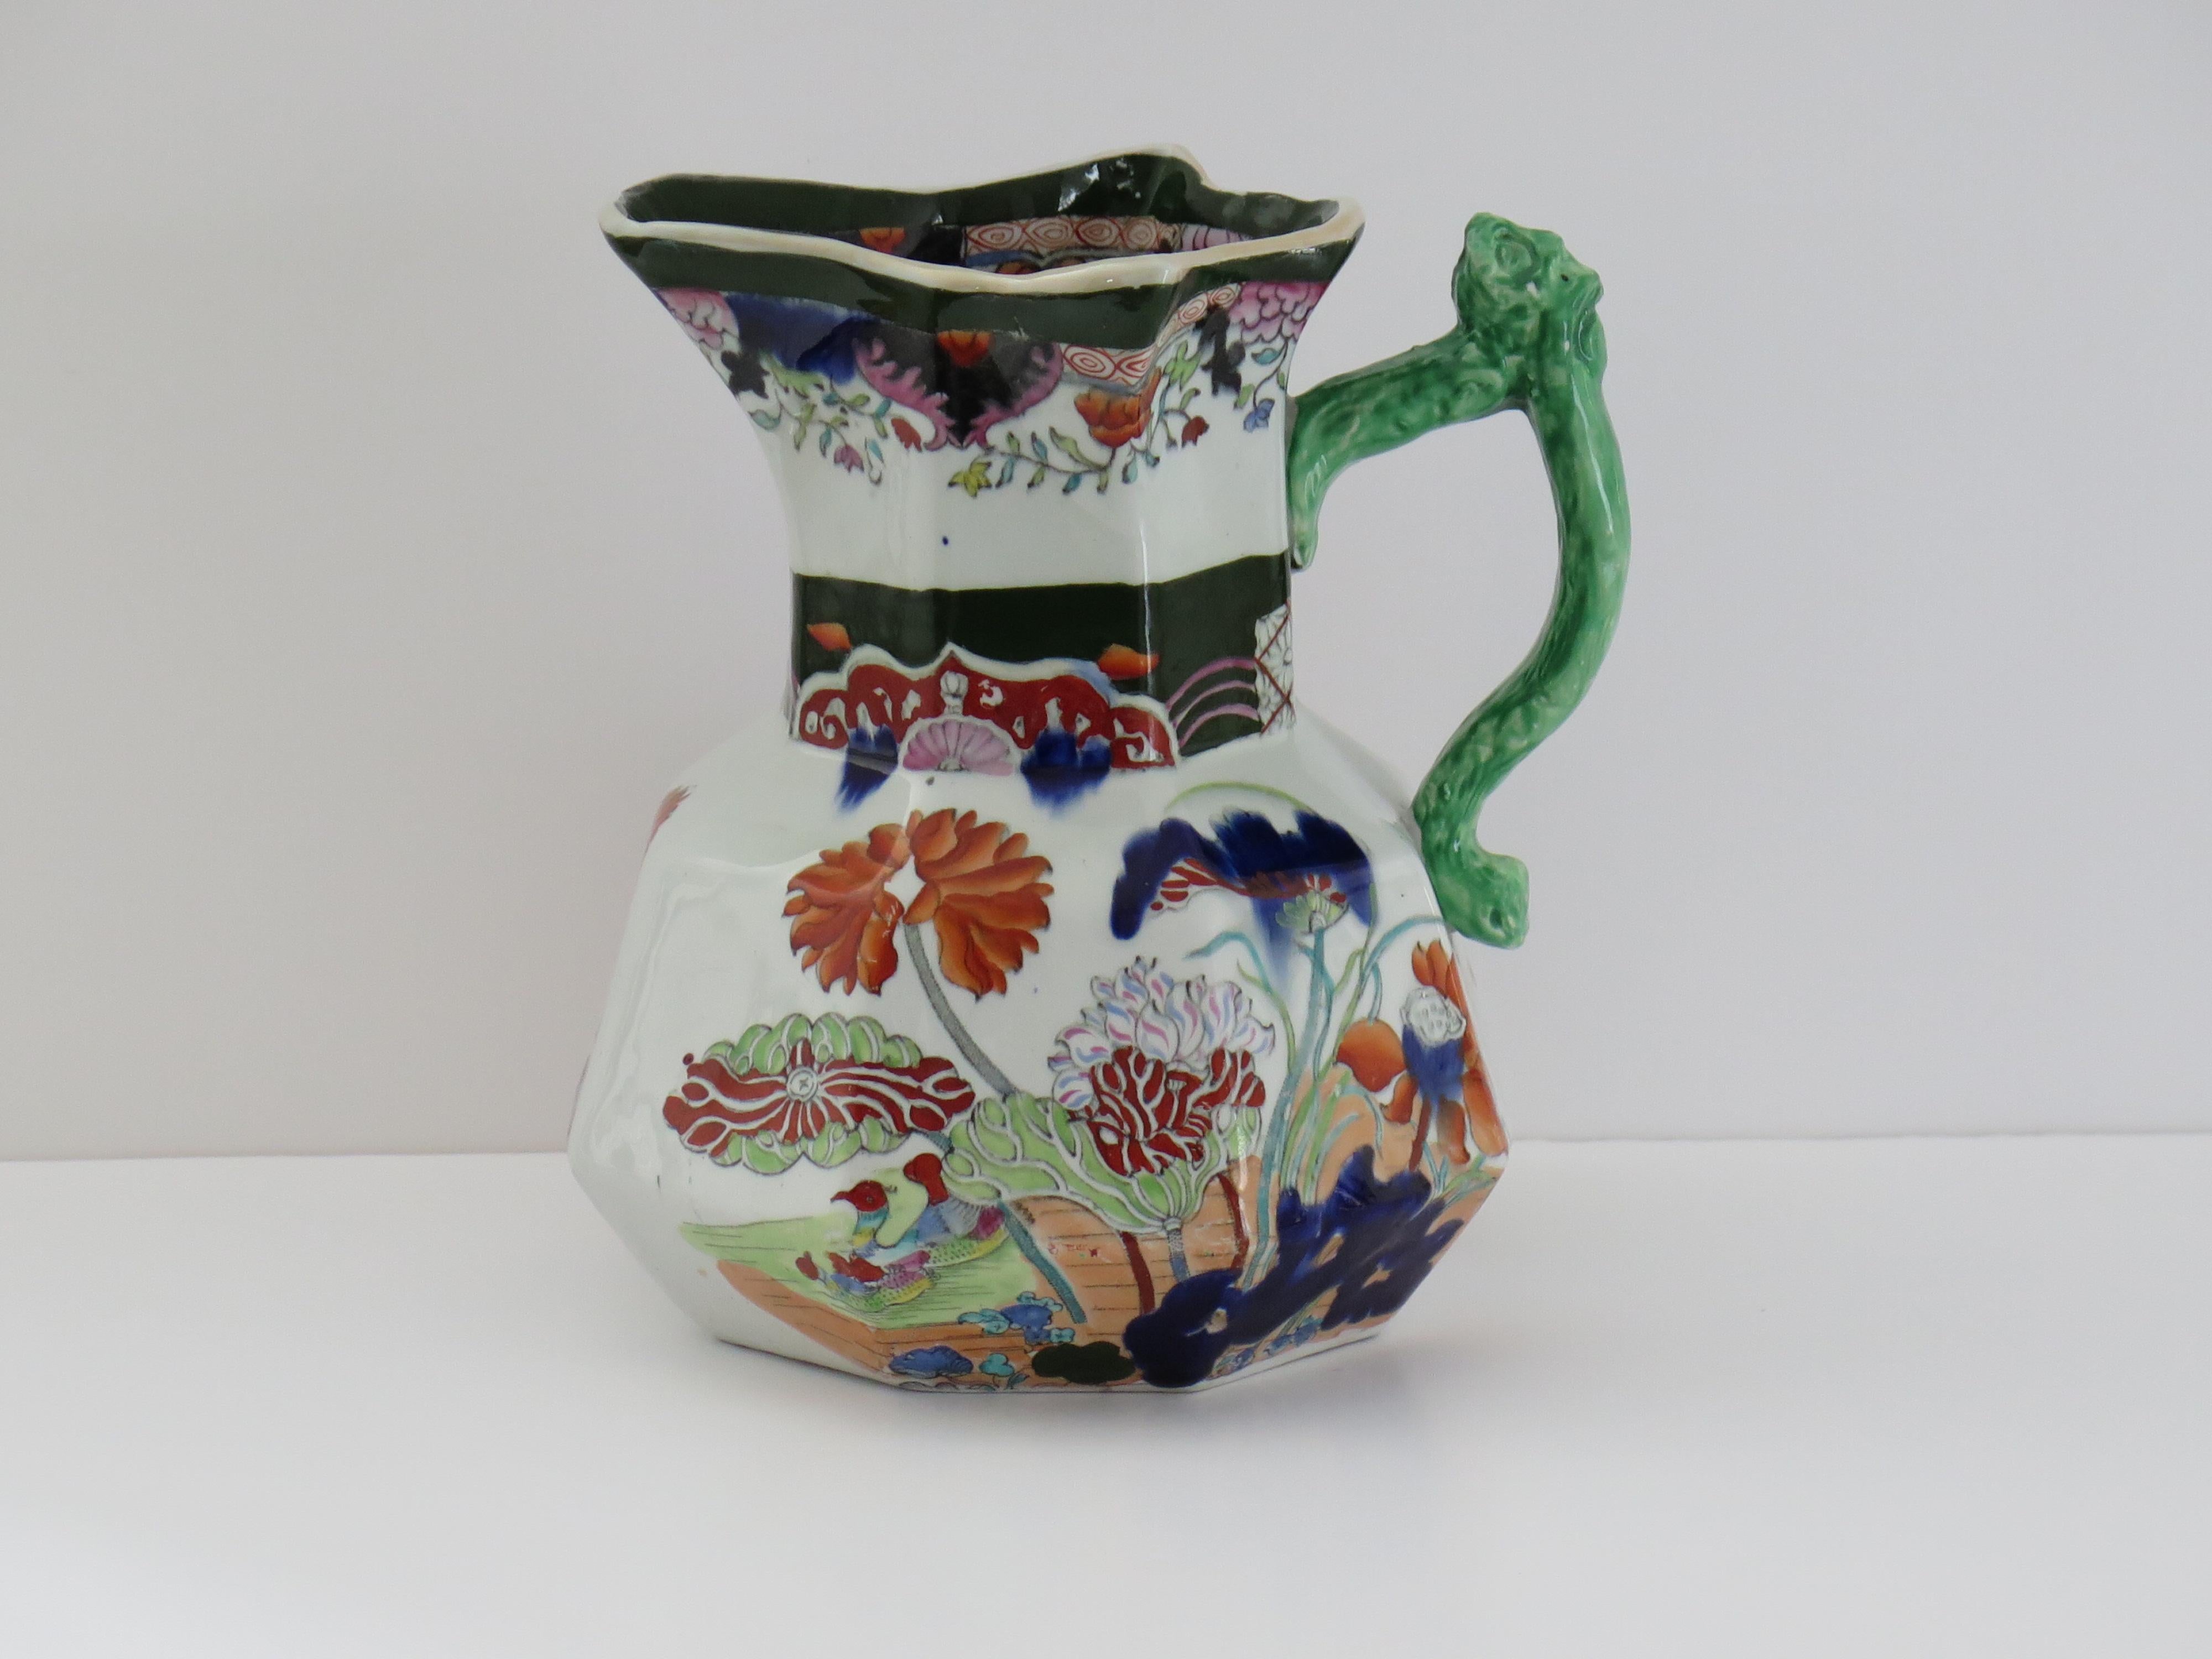 This is a beautifully hand painted Large Jug or Pitcher in the rare Muscove Duck pattern, made by Mason's Ironstone, Lane Delph, England, dating to circa 1825.

This is a one of Mason's larger Jugs at 8.5 inches high. It is well potted and heavy